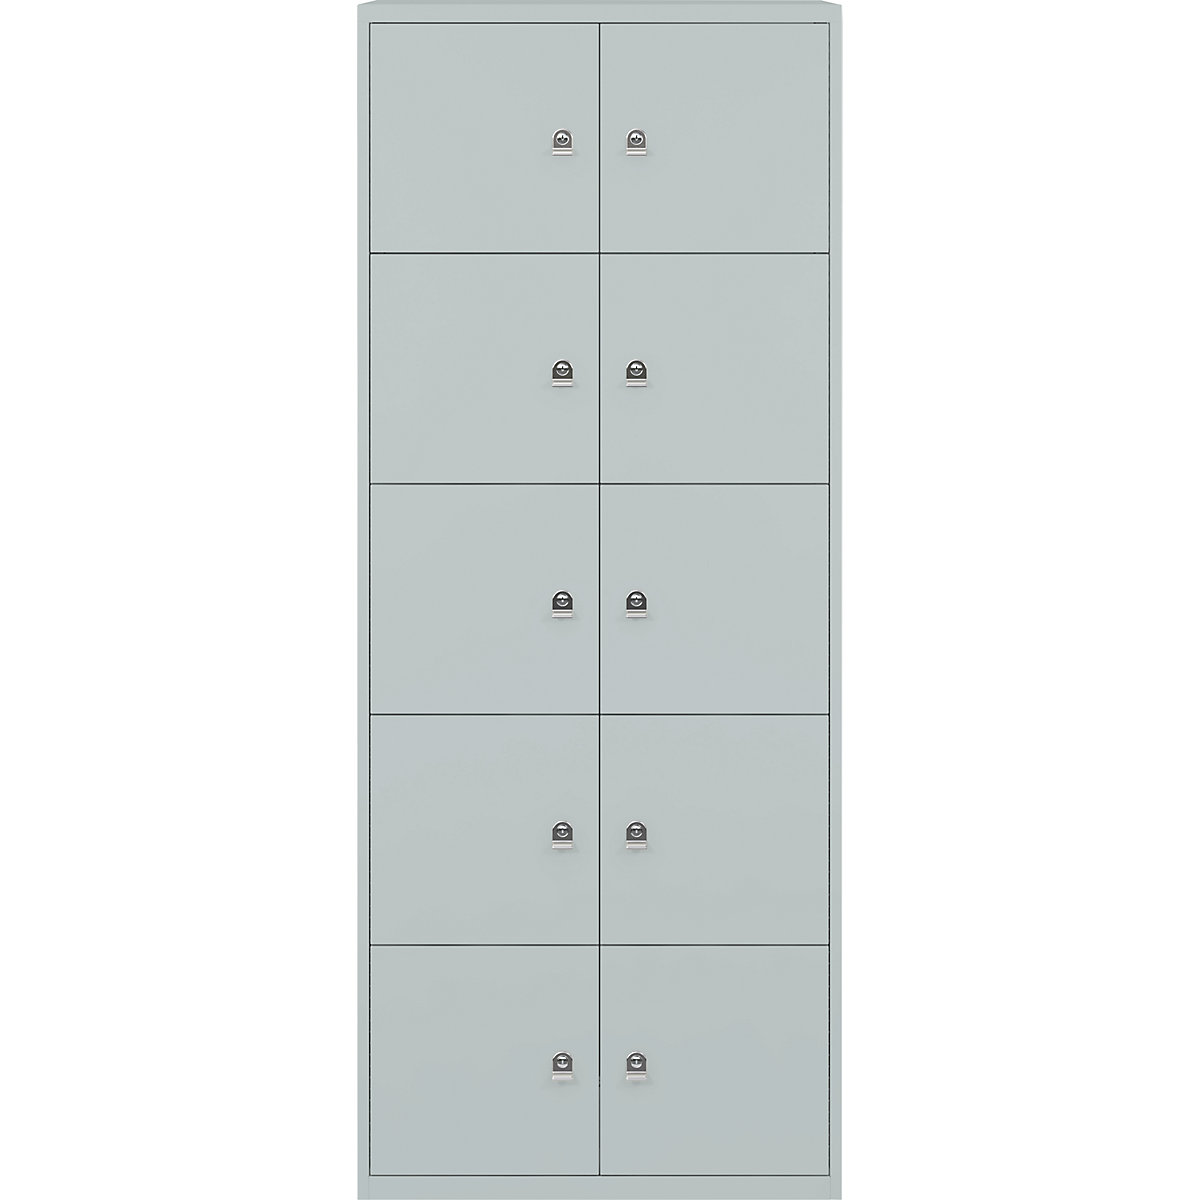 BISLEY – LateralFile™ lodge, with 10 lockable compartments, height 375 mm each, silver